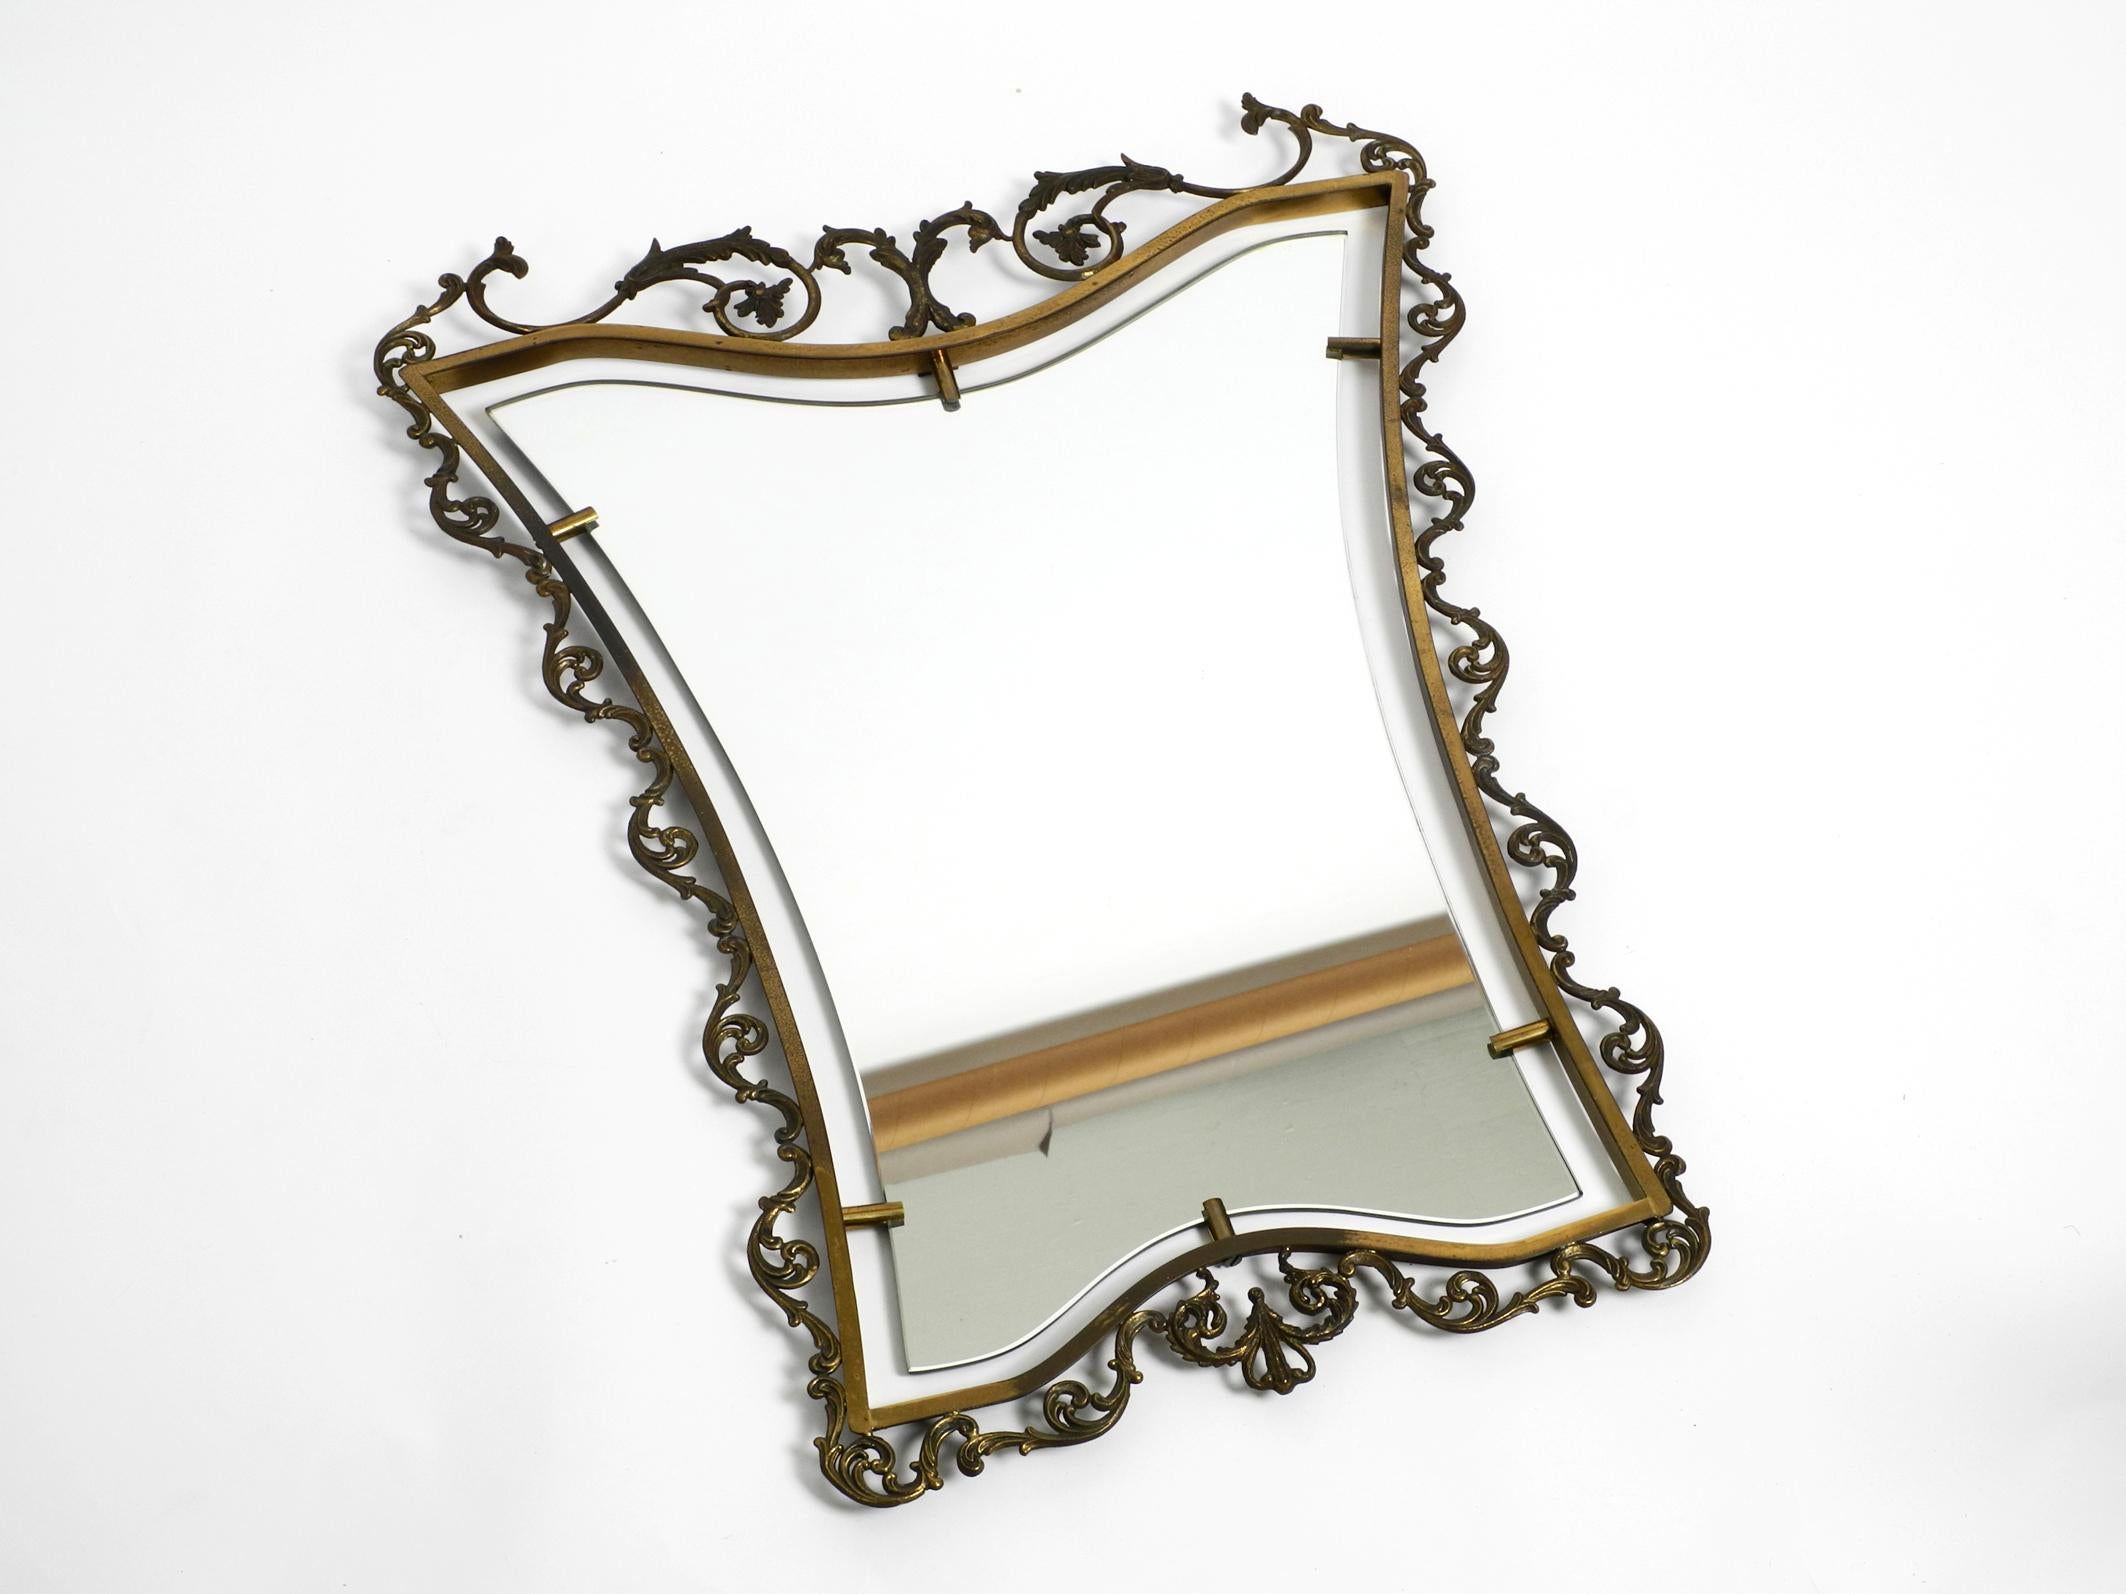 Extraordinary large heavy Mid Century Italian wall mirror with an ornate brass frame.
Great, elaborate design with a decorated brass frame in a diabolo shape.
Very good vintage condition without damage, with a wonderful patina on the brass.
No